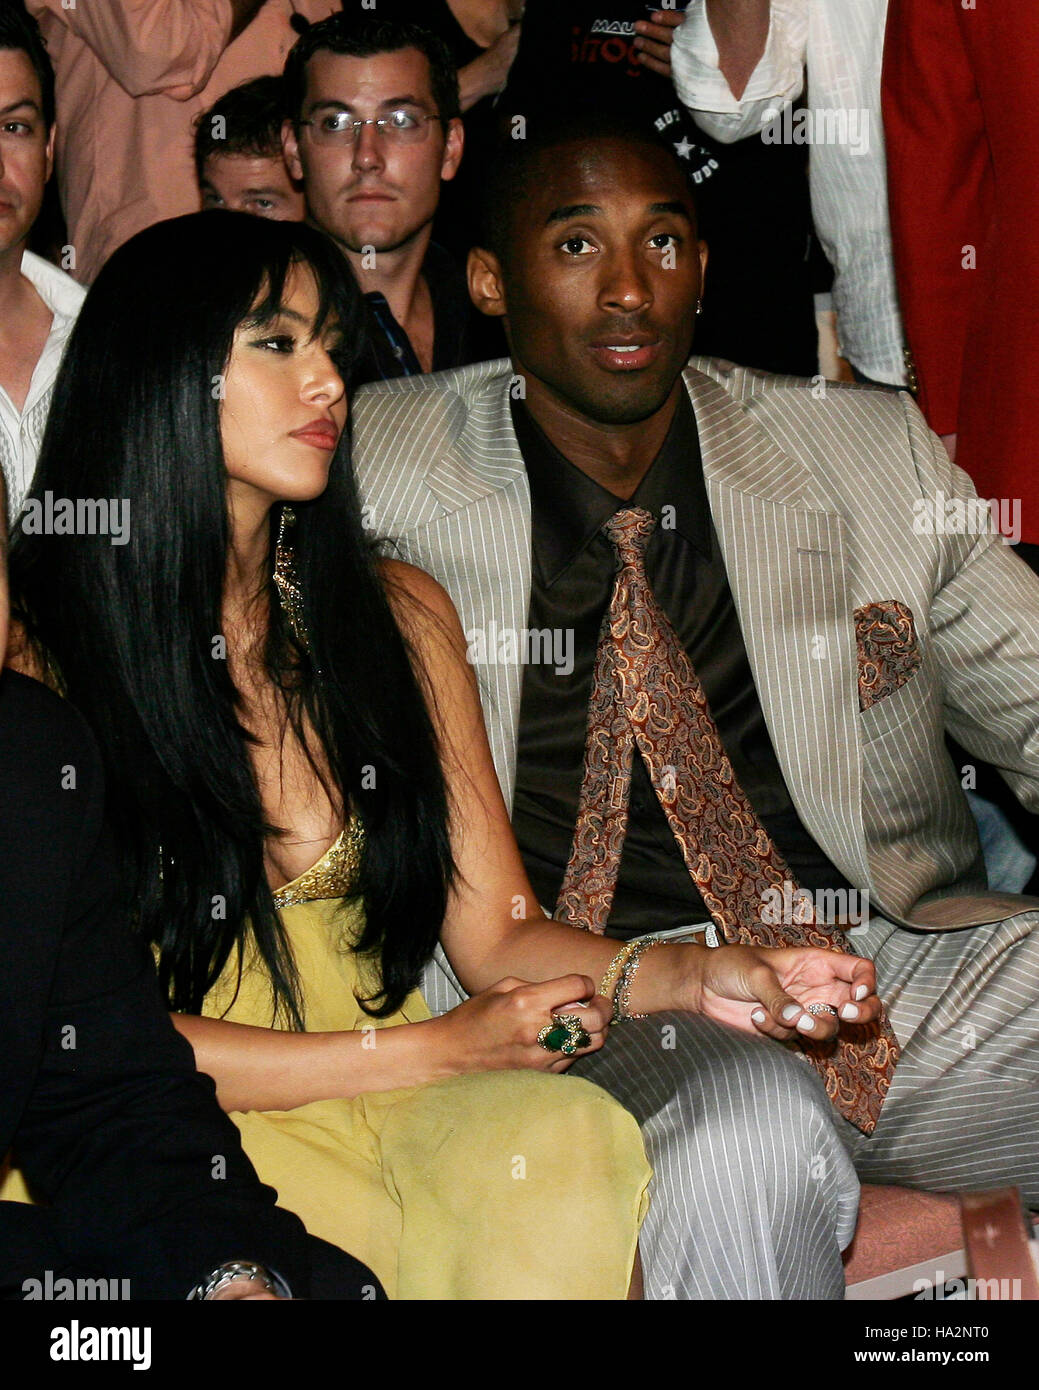 Kobe Bryant and his wife, Vanessa, at UFC 74 during a mixed martial arts match at the Mandalay Bay Events Center in Las Vegas on Saturday August, 25, 2007. Photo credit: Francis Specker Stock Photo